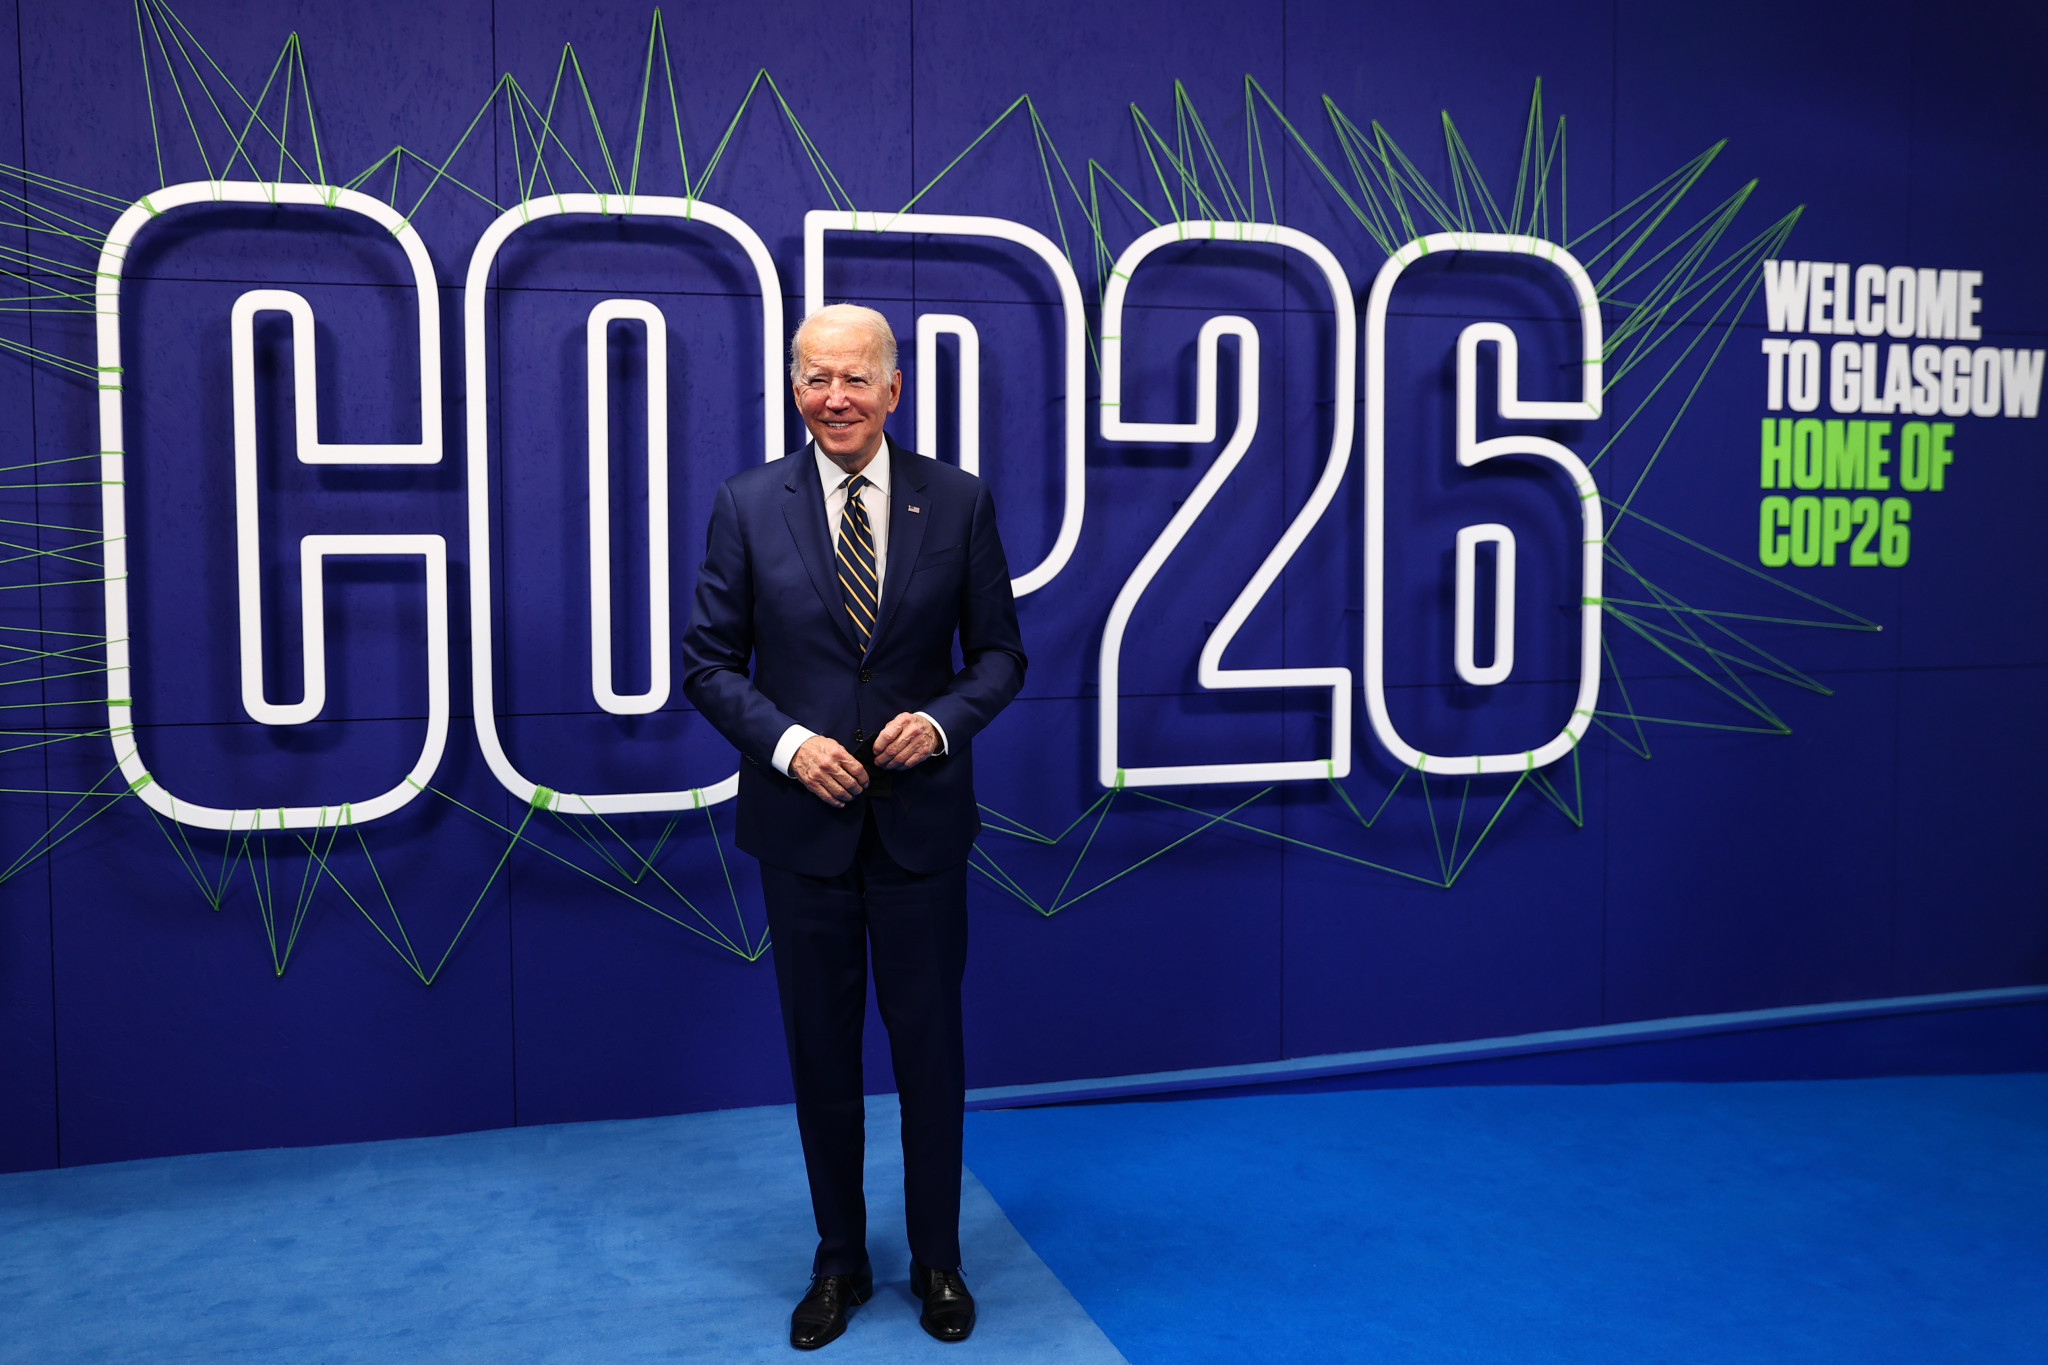 British Olympic gold medallist gold medallist has warned Joe Biden and world leaders meeting at COP26 they need to tackle the climate change crisis seriously ©Getty Images